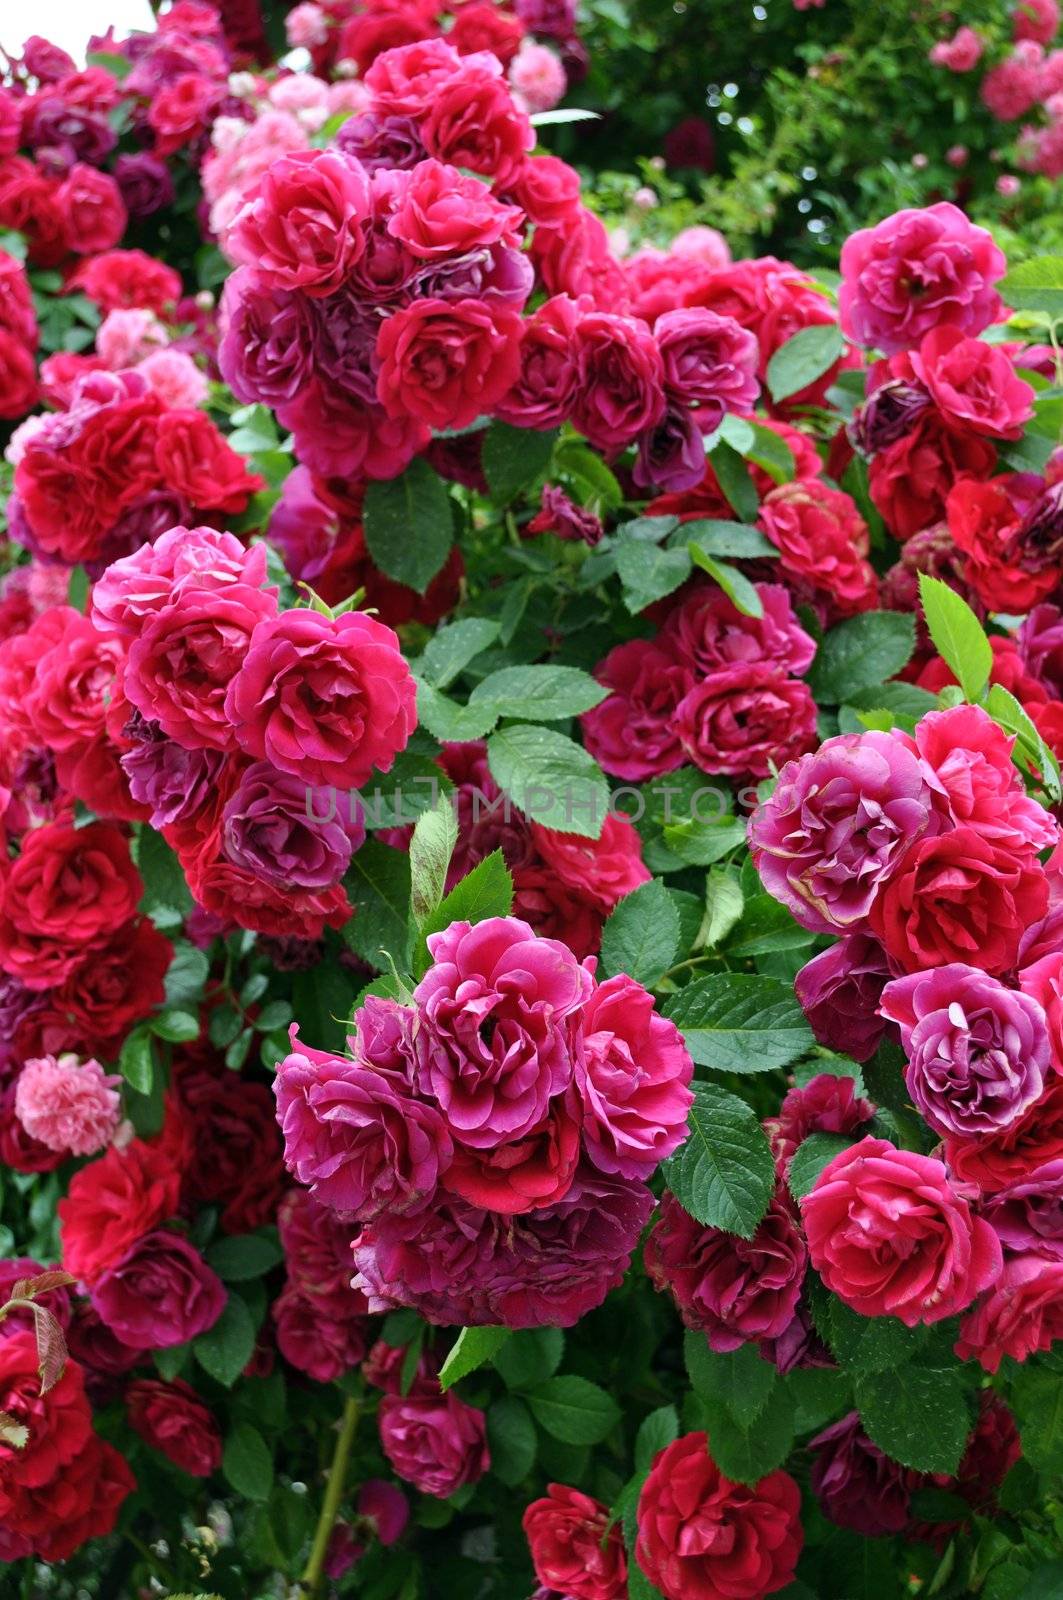 Tree of country roses with numerous rich rose flowers